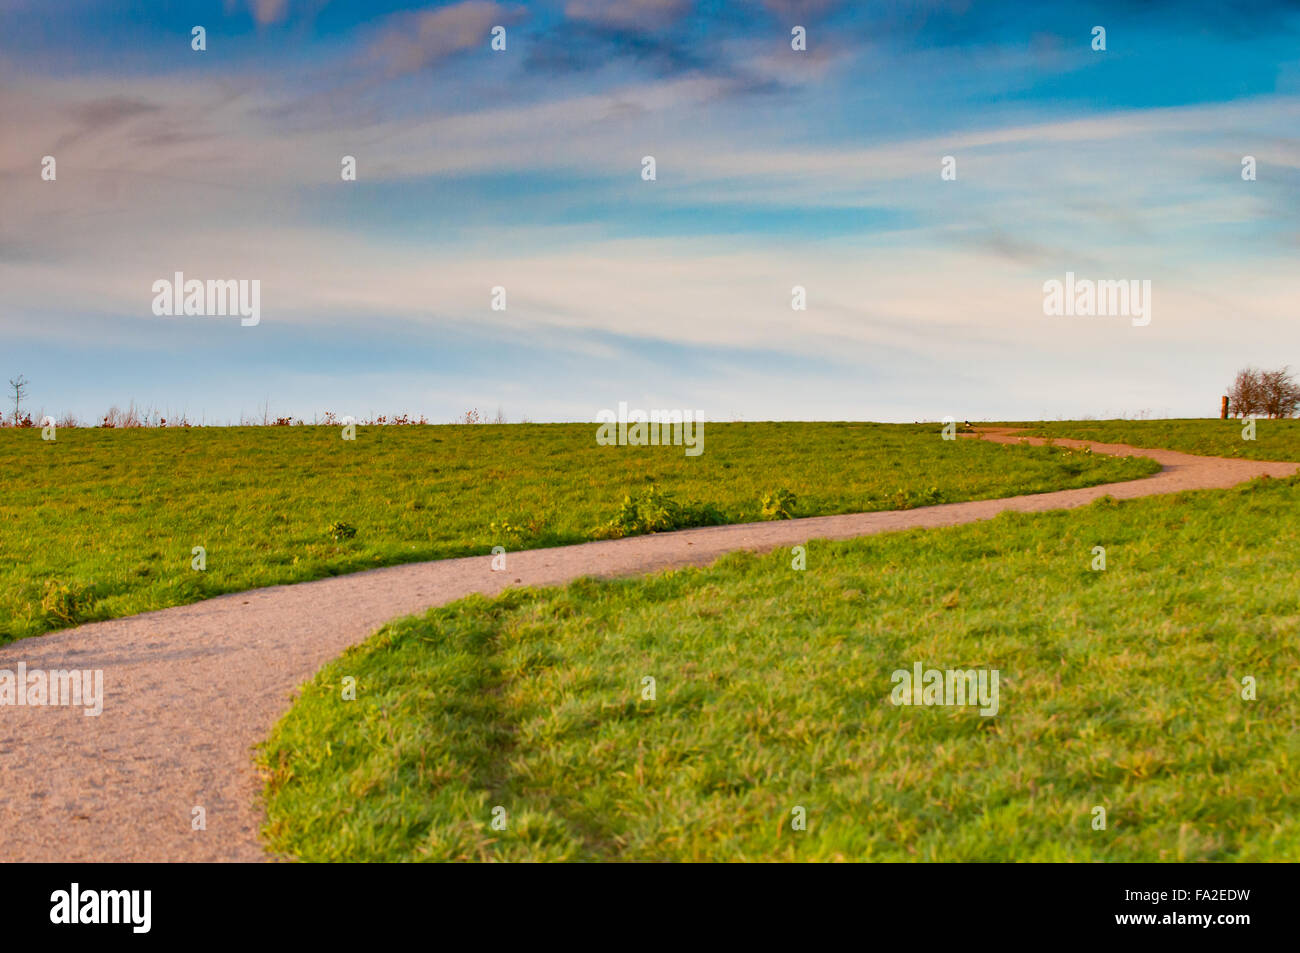 Winding path through a grassy field in a nature reserve Stock Photo